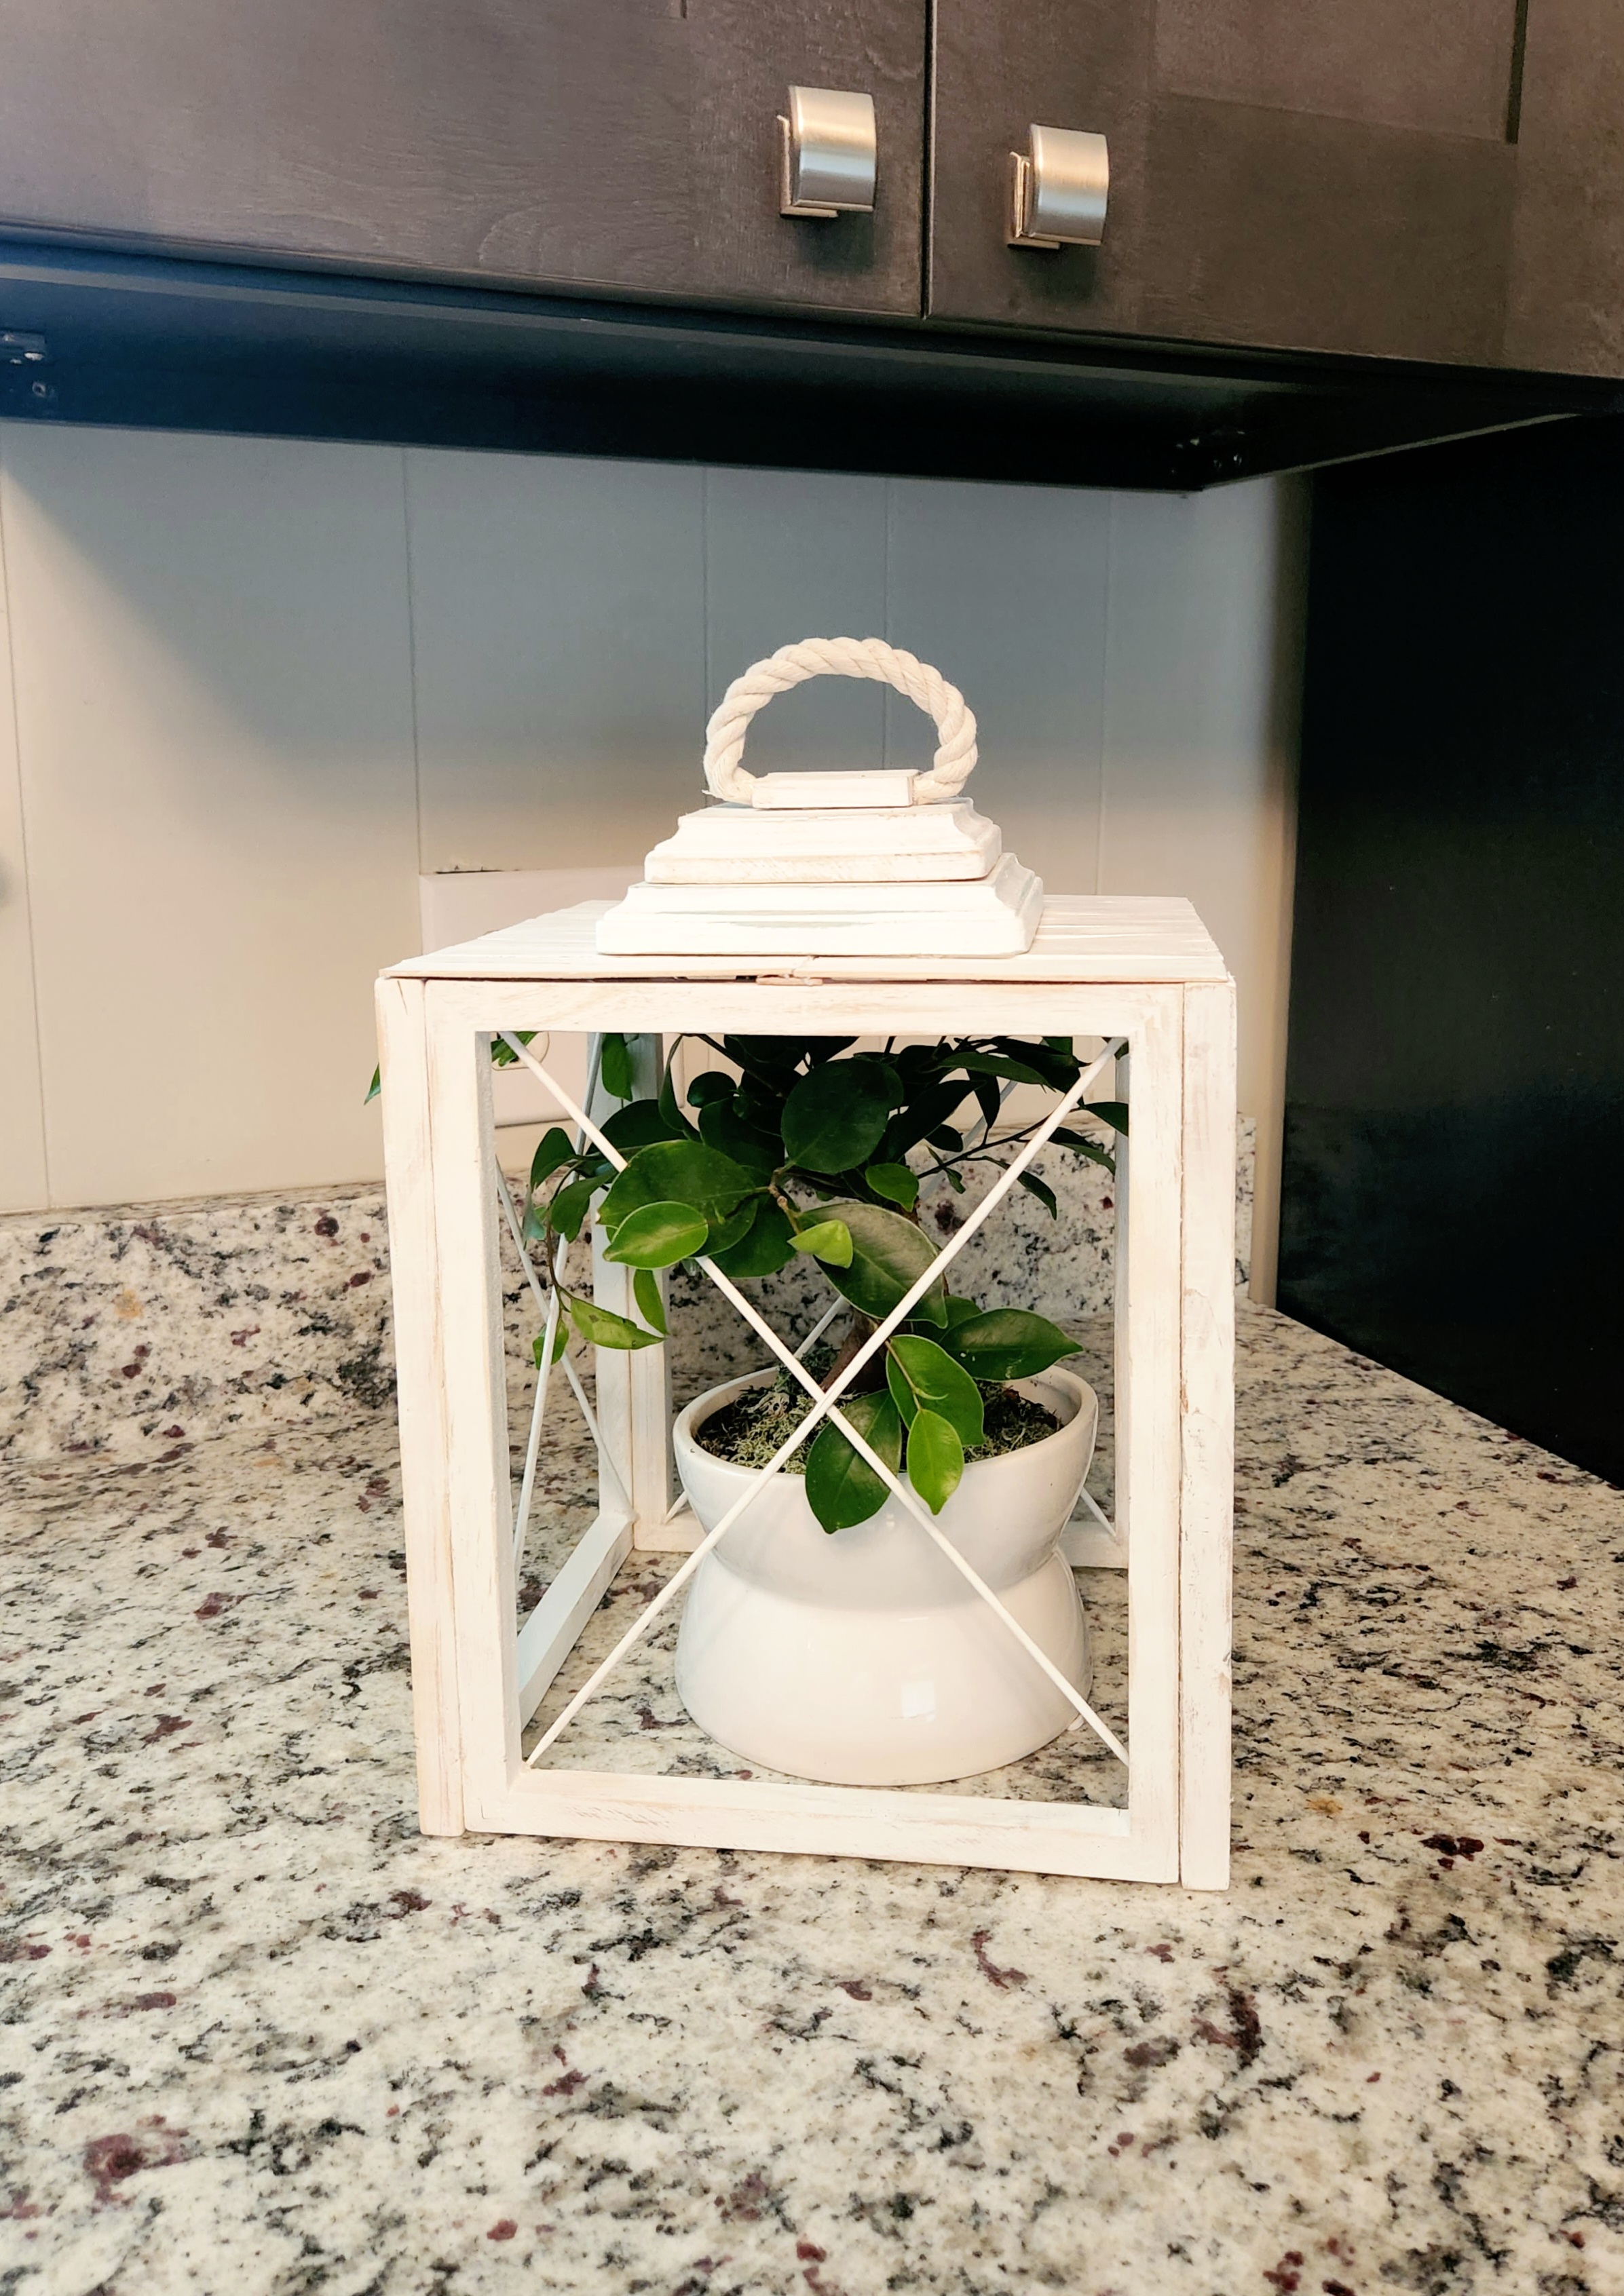 Dollar Tree lantern: DIY wood lantern painted white, containing a potted bonsai tree, and placed on a granite countertop.